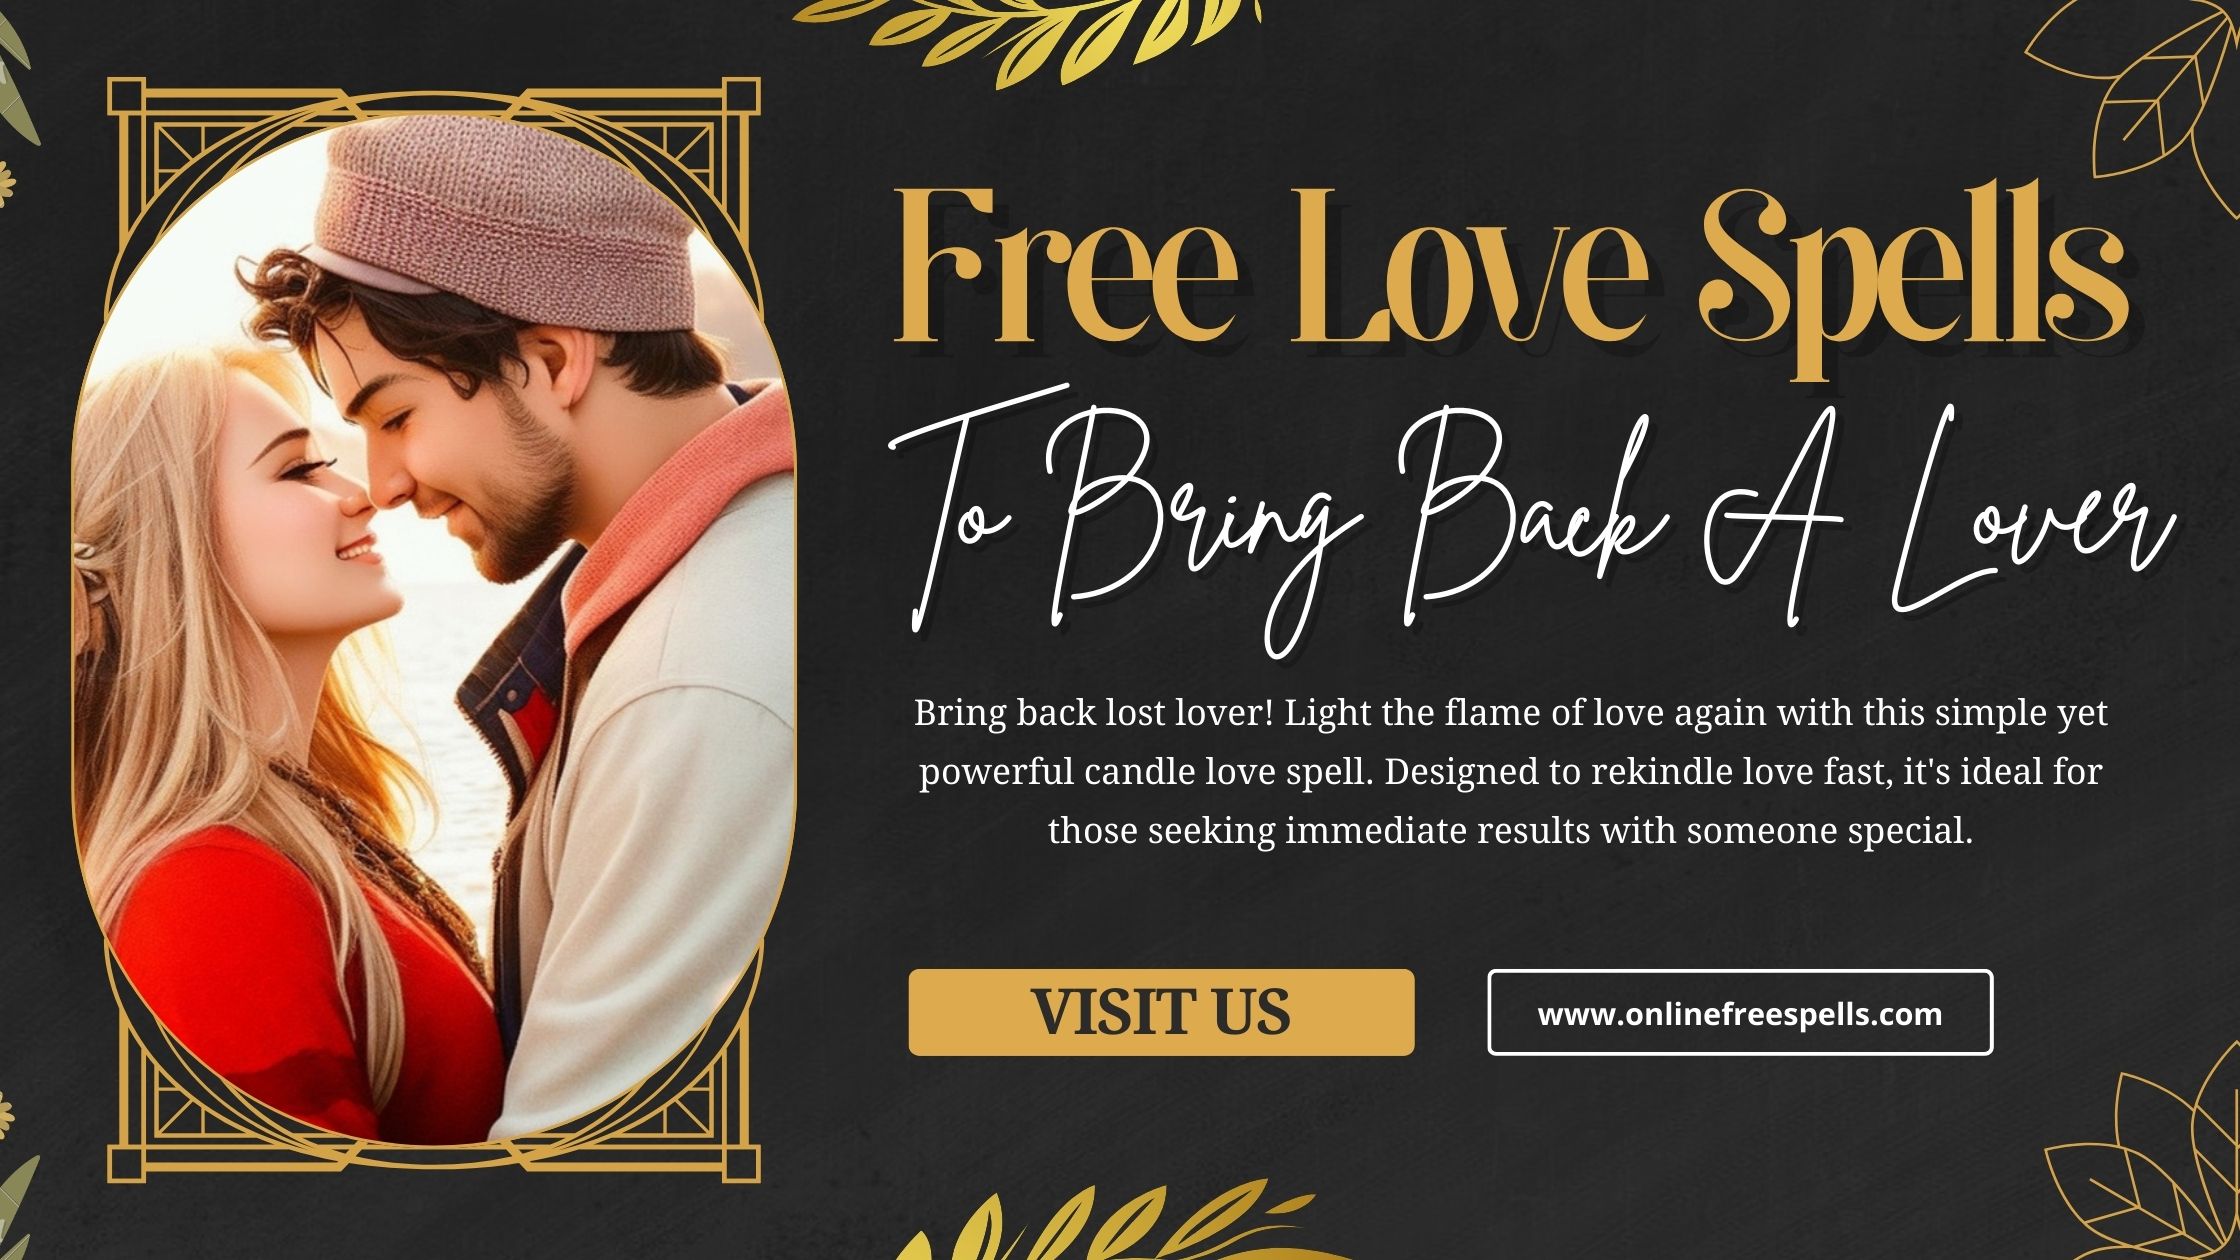 Free Love Spells To Bring Back A Lover.jpg